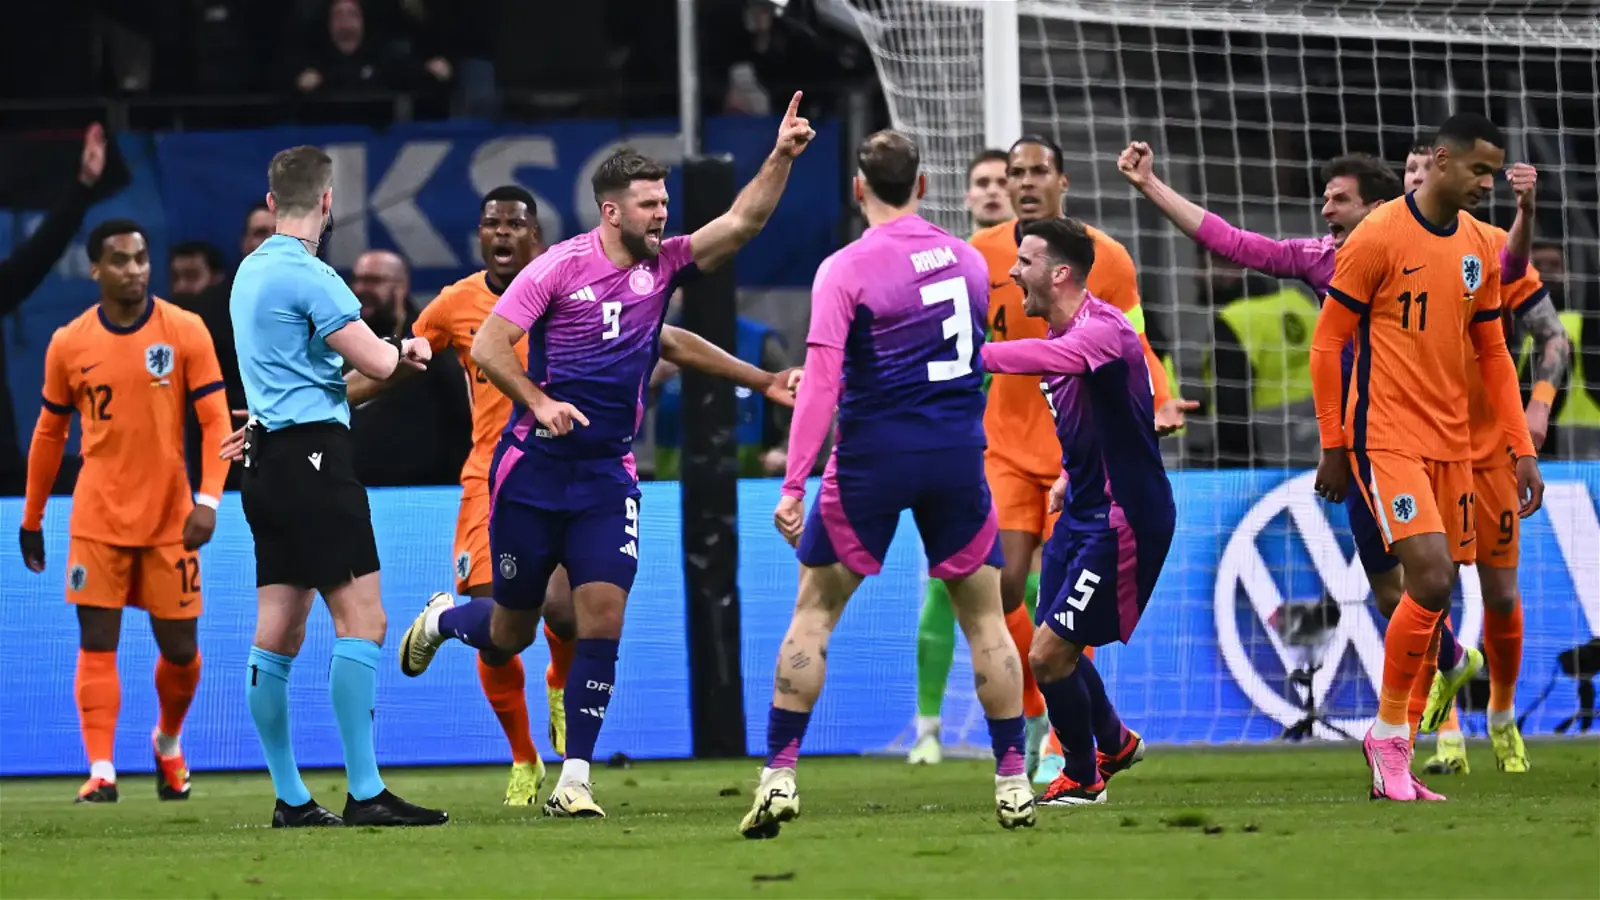 Fuellkrug strikes late to give Germany 2-1 victory over Netherlands